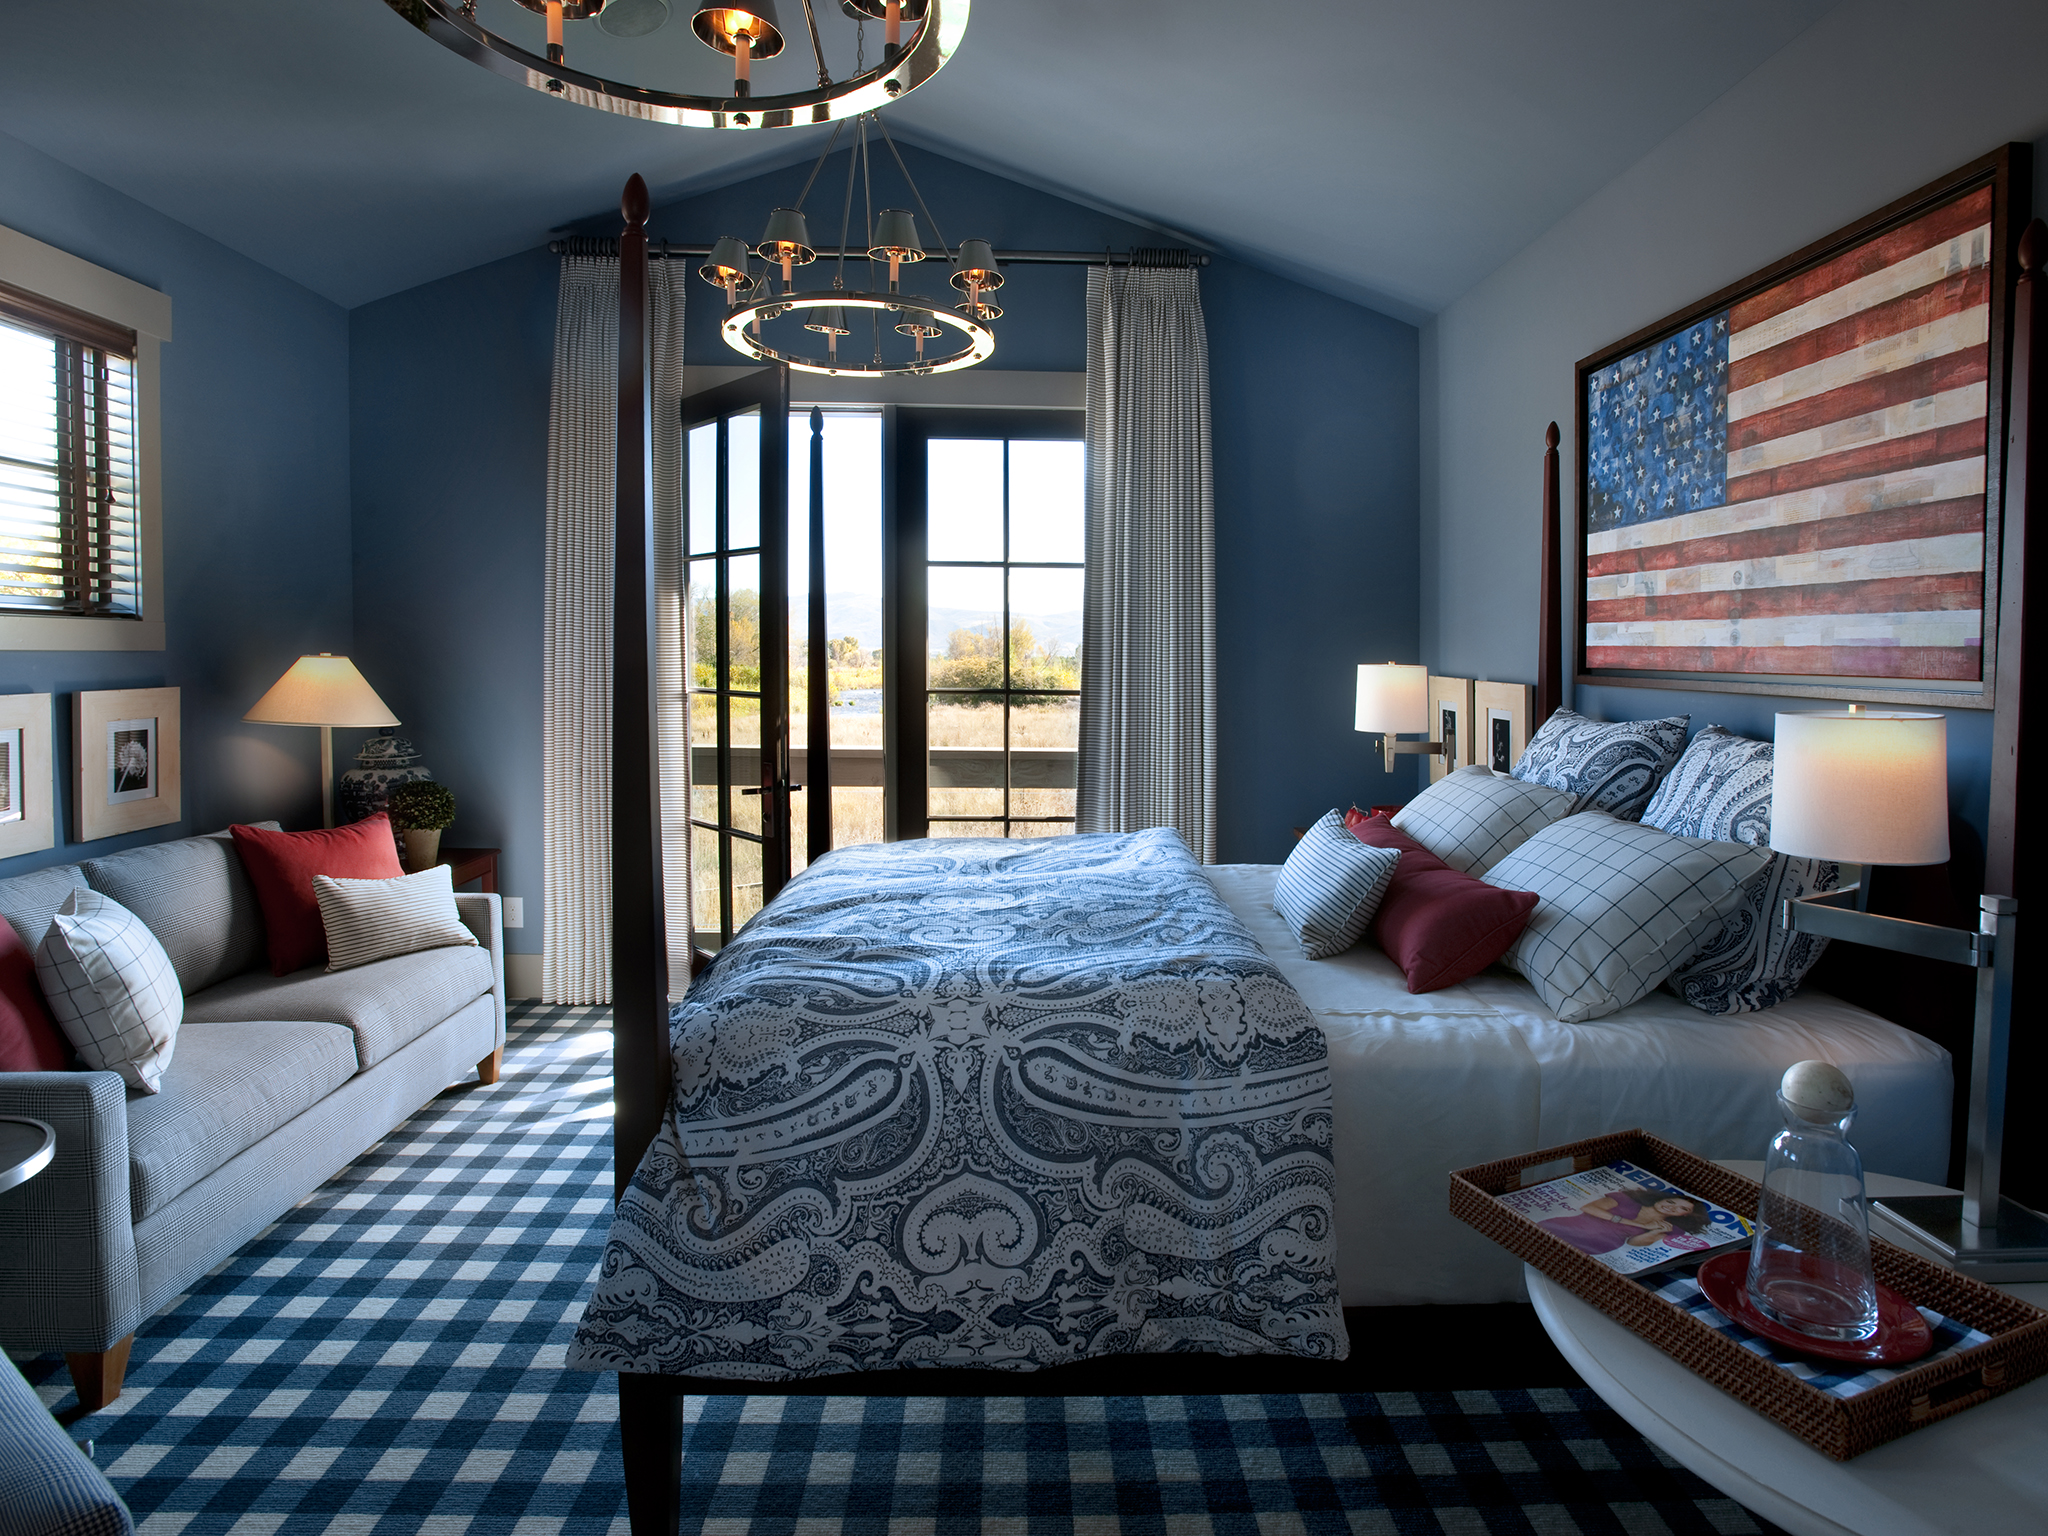 40 Best Dream Bedroom Design Ideas In All Colors And Sizes Interior